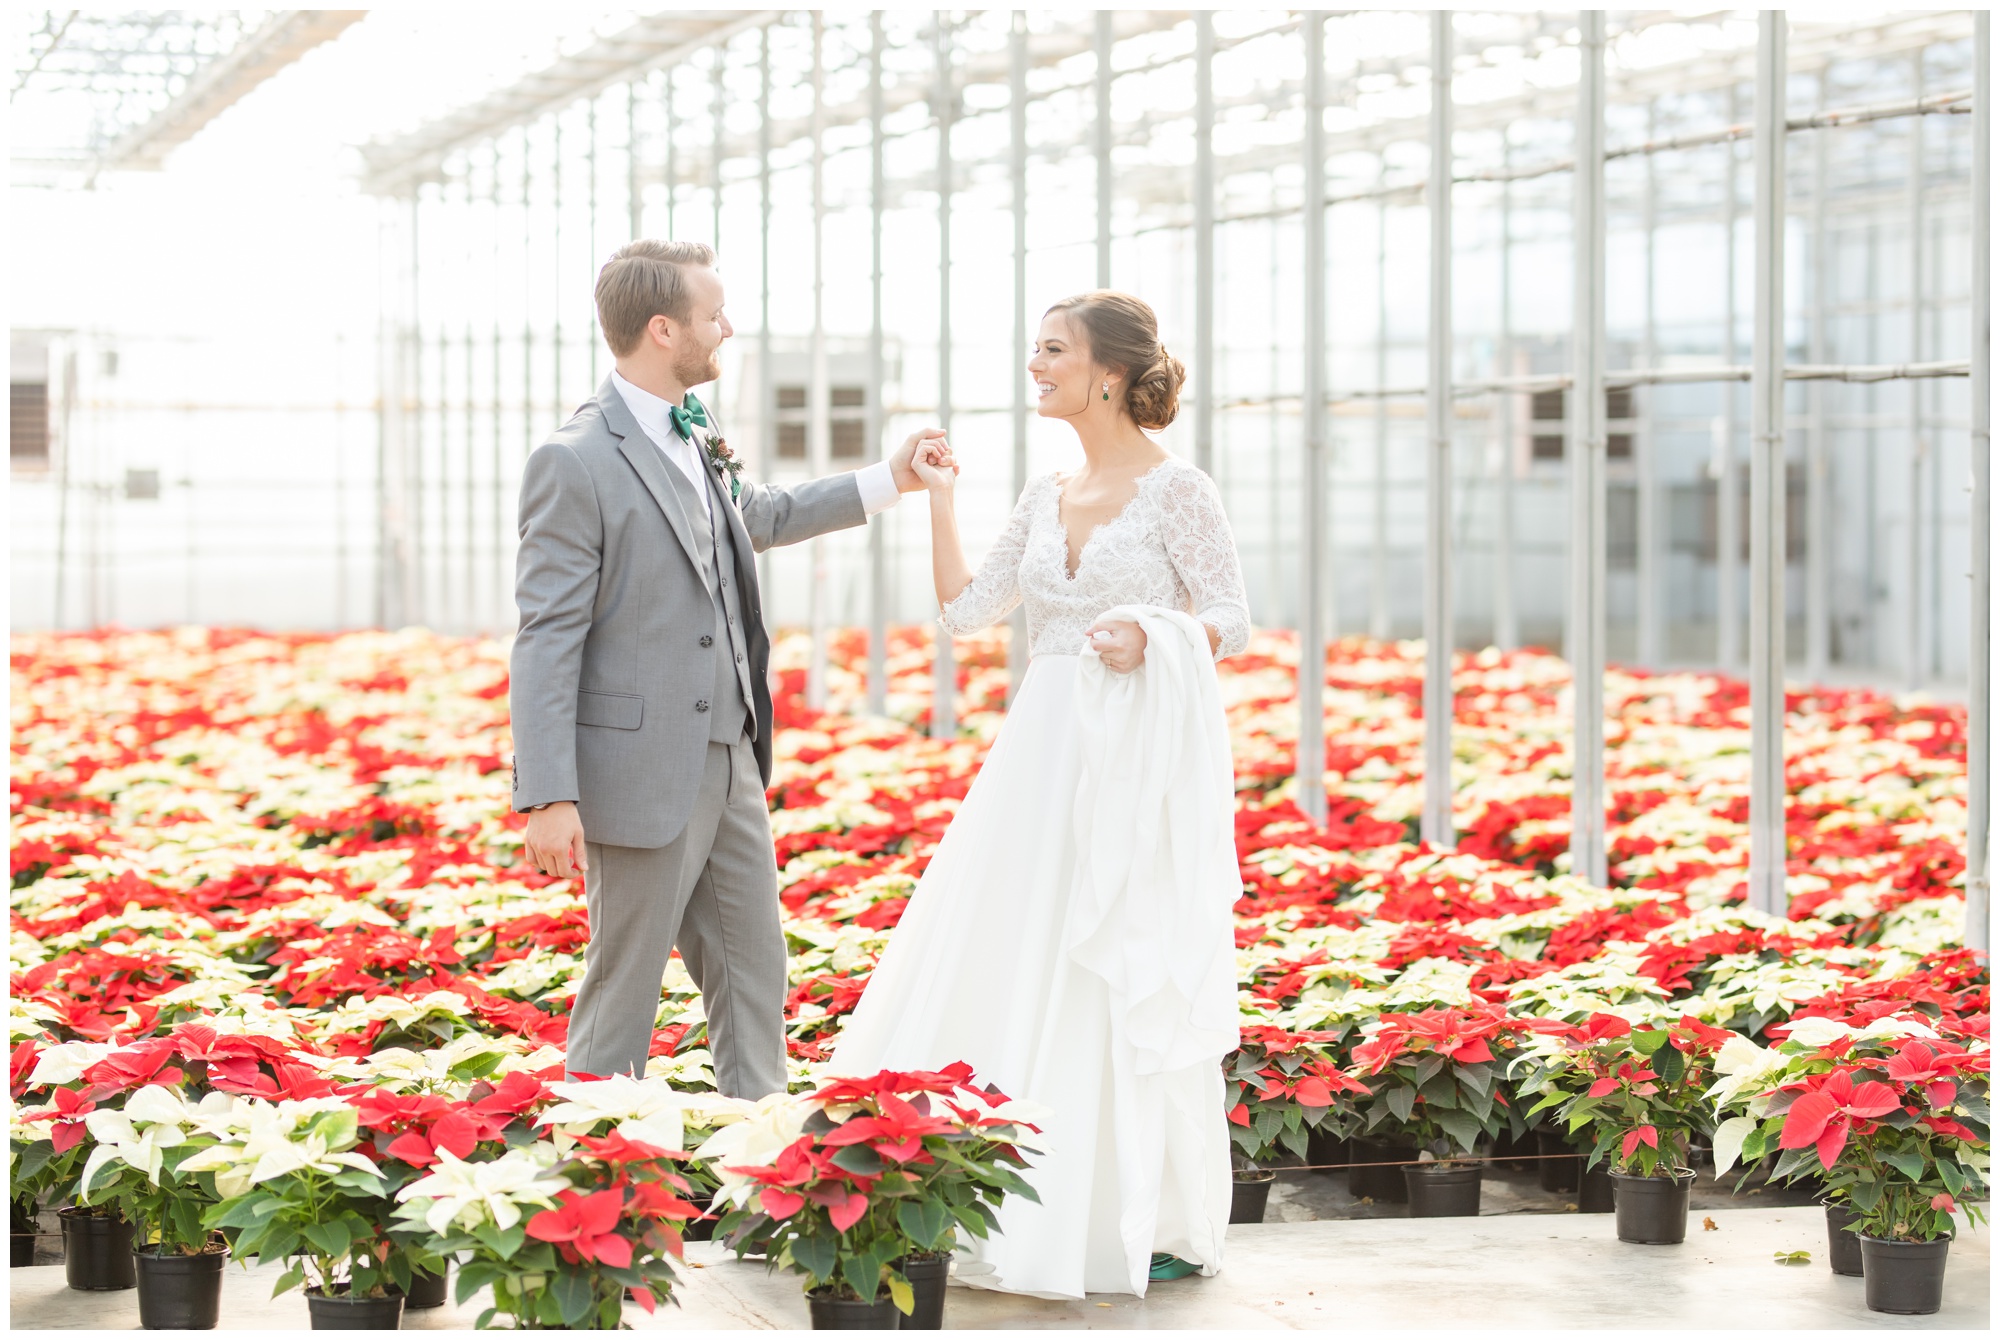 Greenhouse winter wedding red and white poinsettias